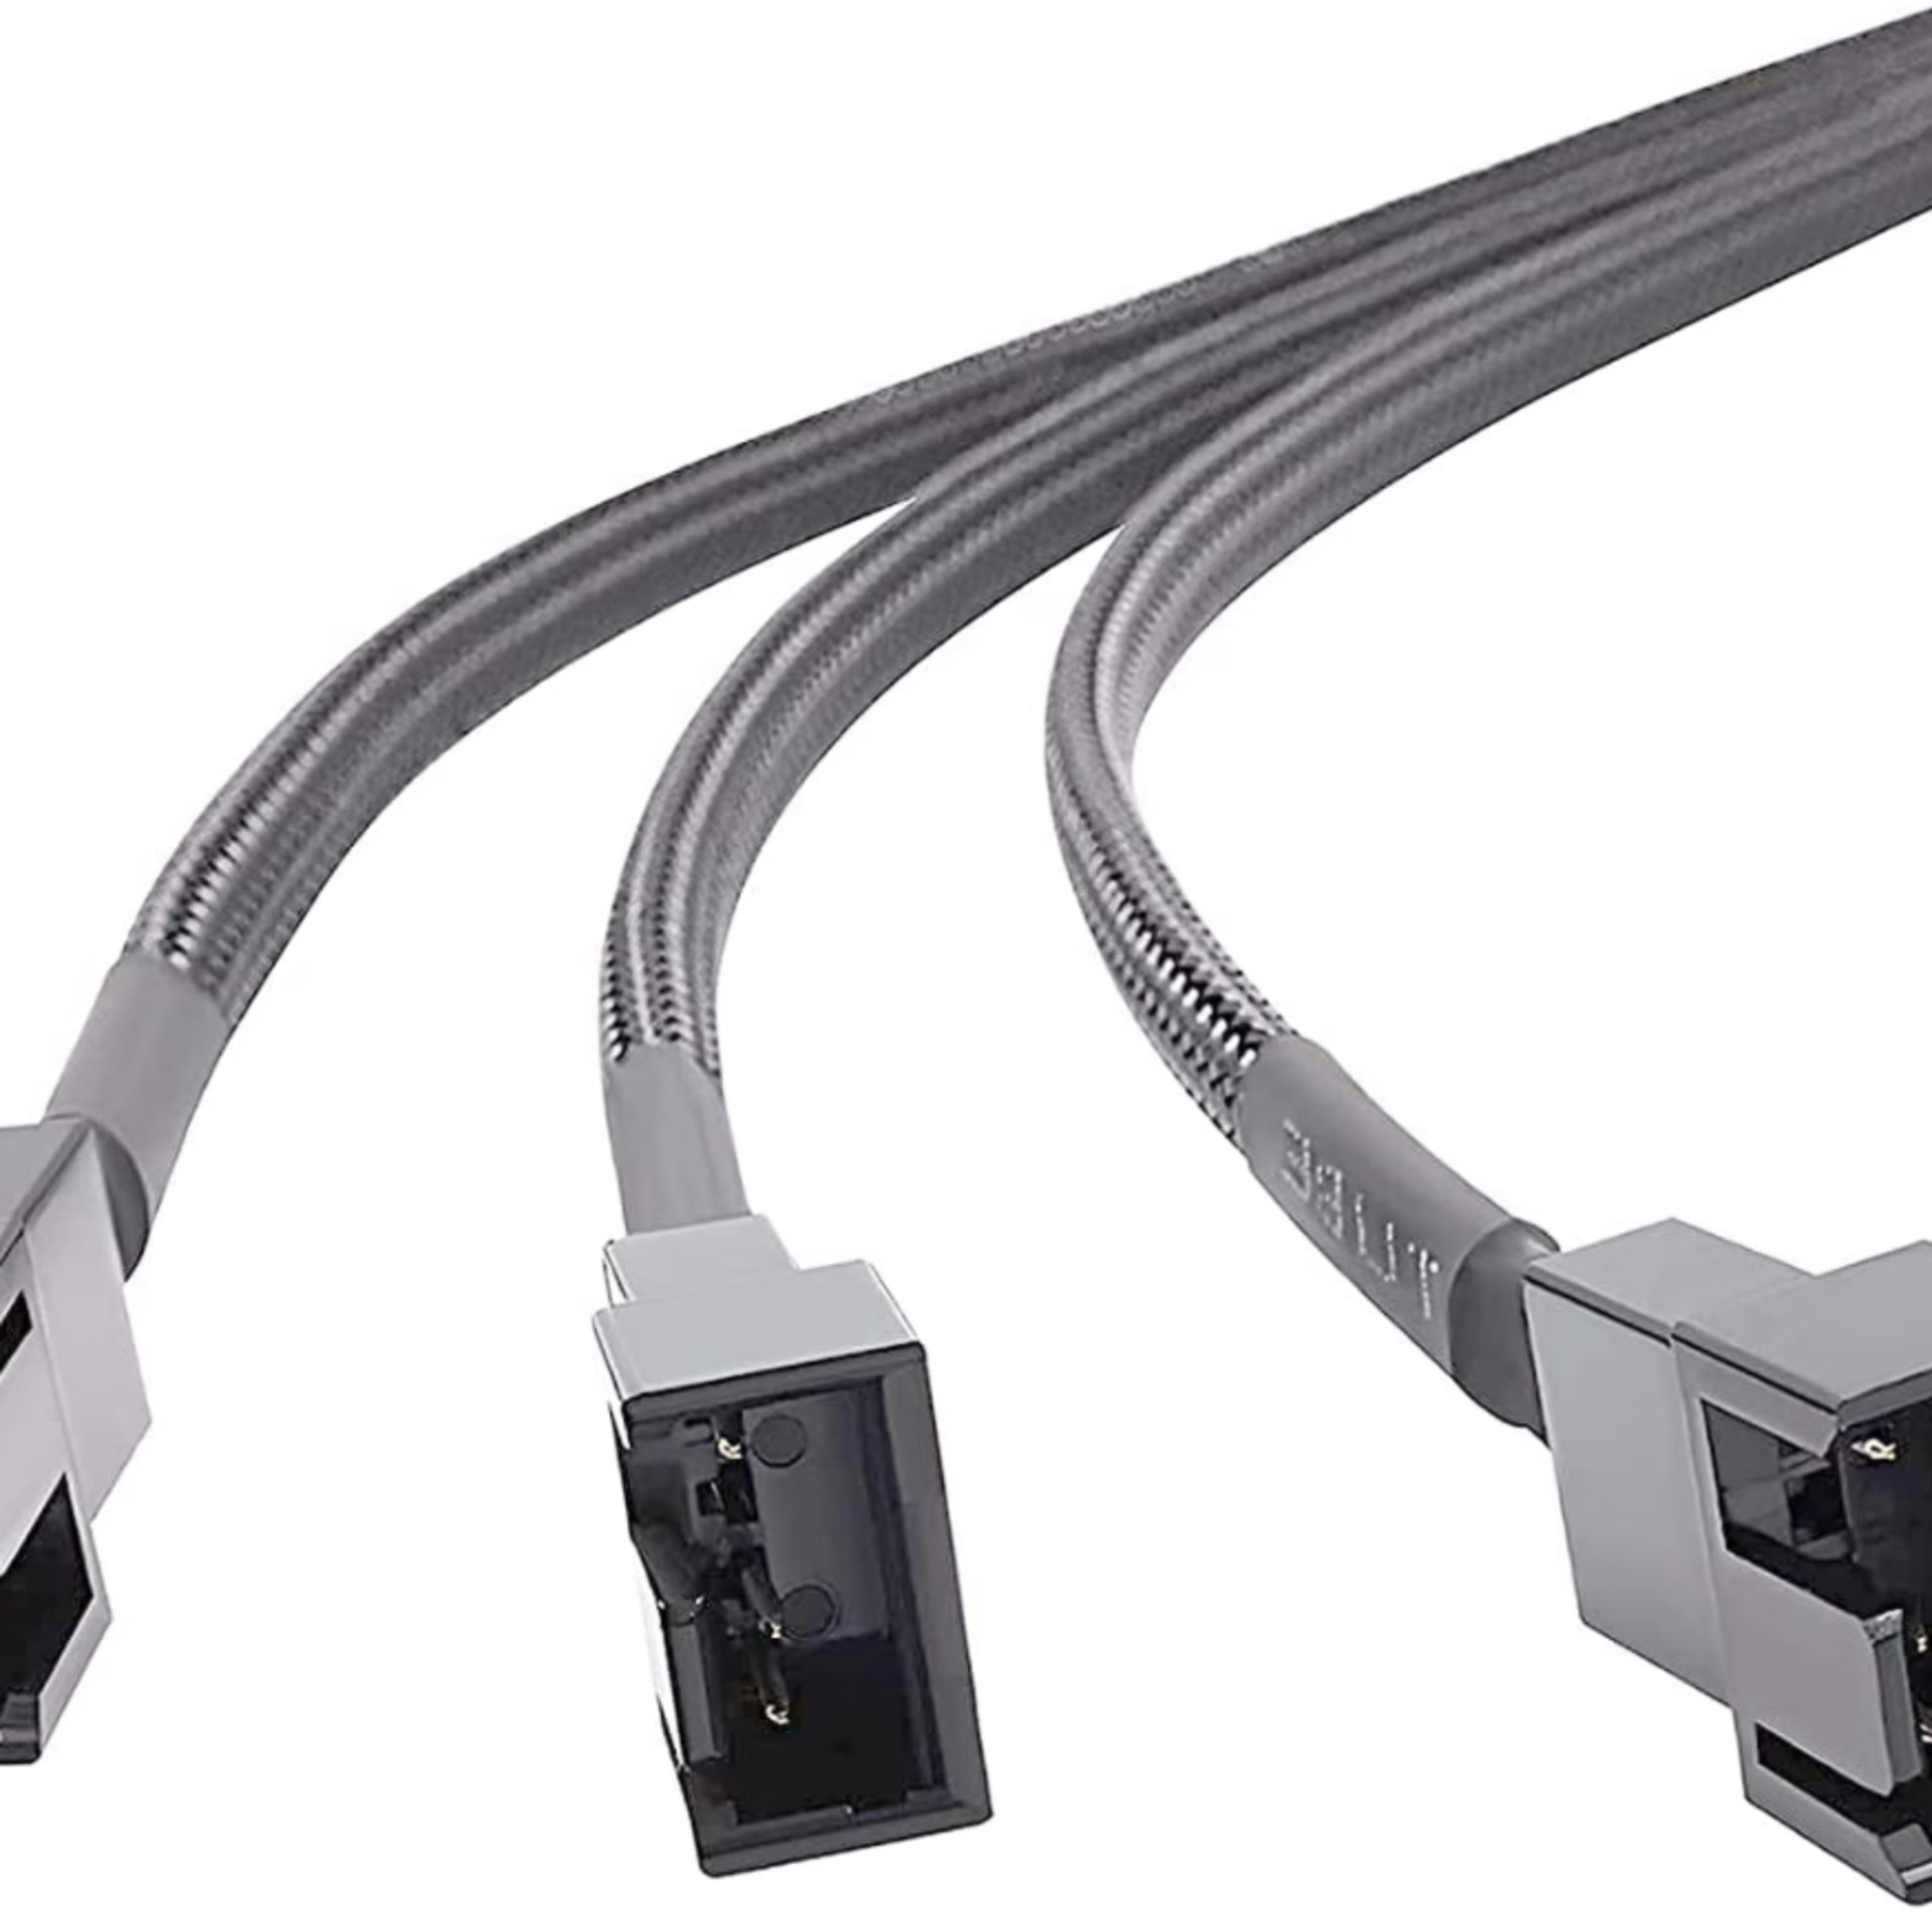 Cable Splitters